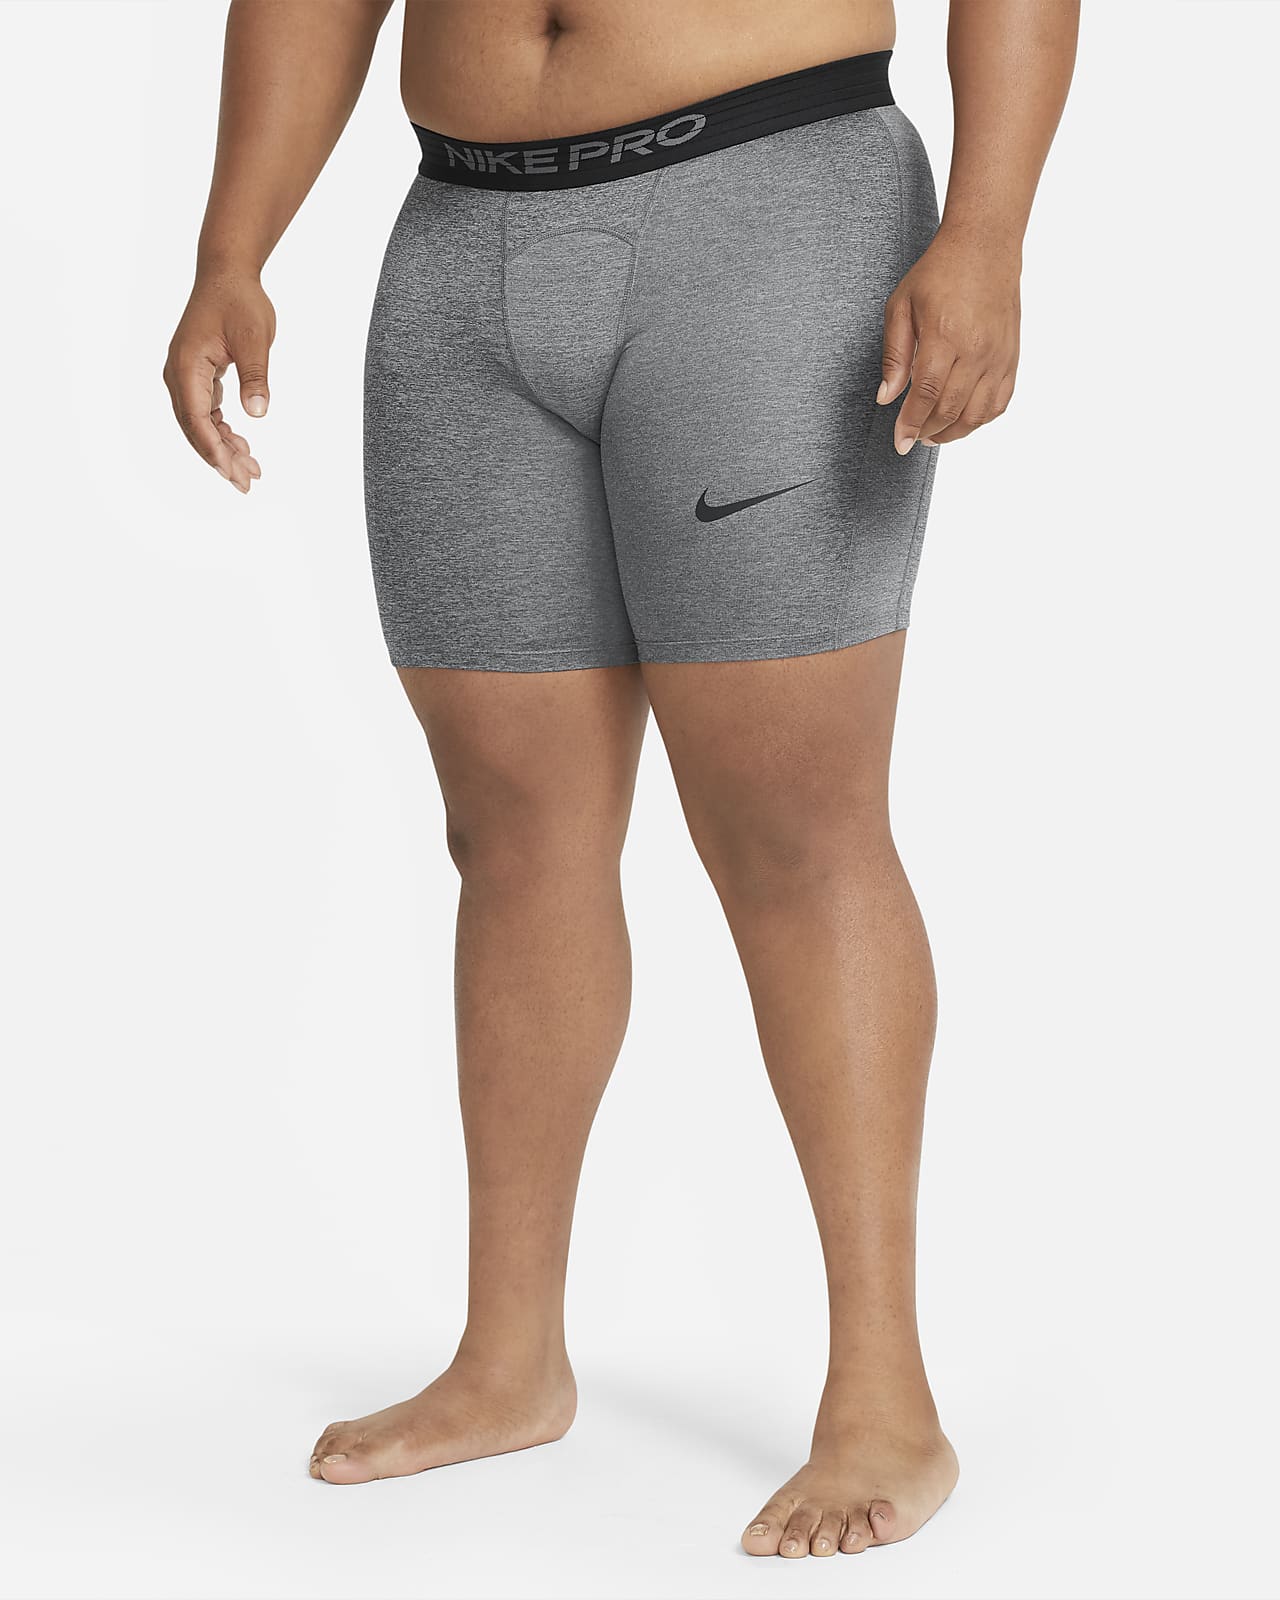 nike women's 7 inch compression shorts